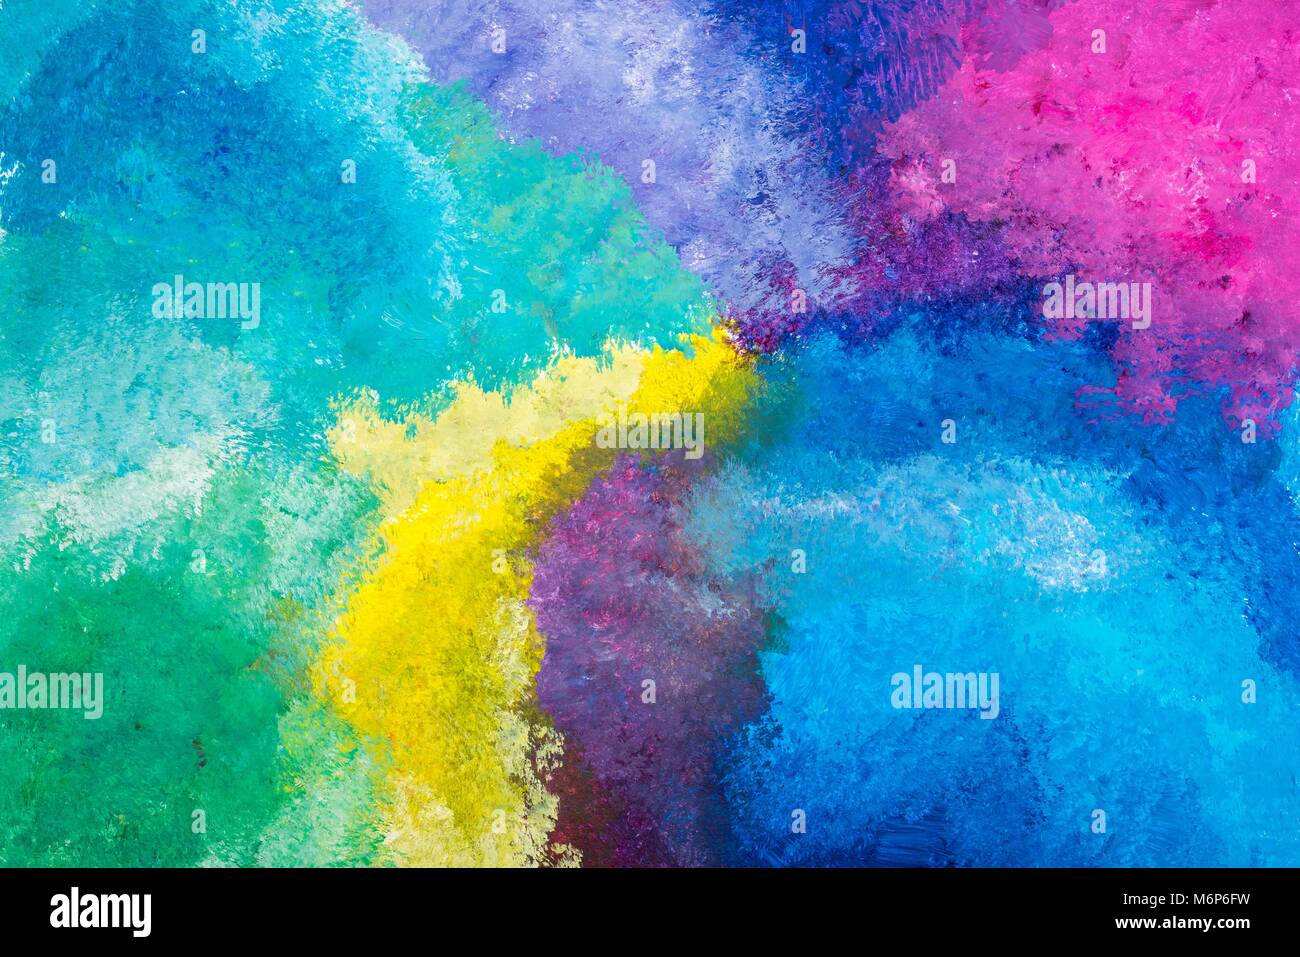 Abstract hand painted watercolor background Stock Photo